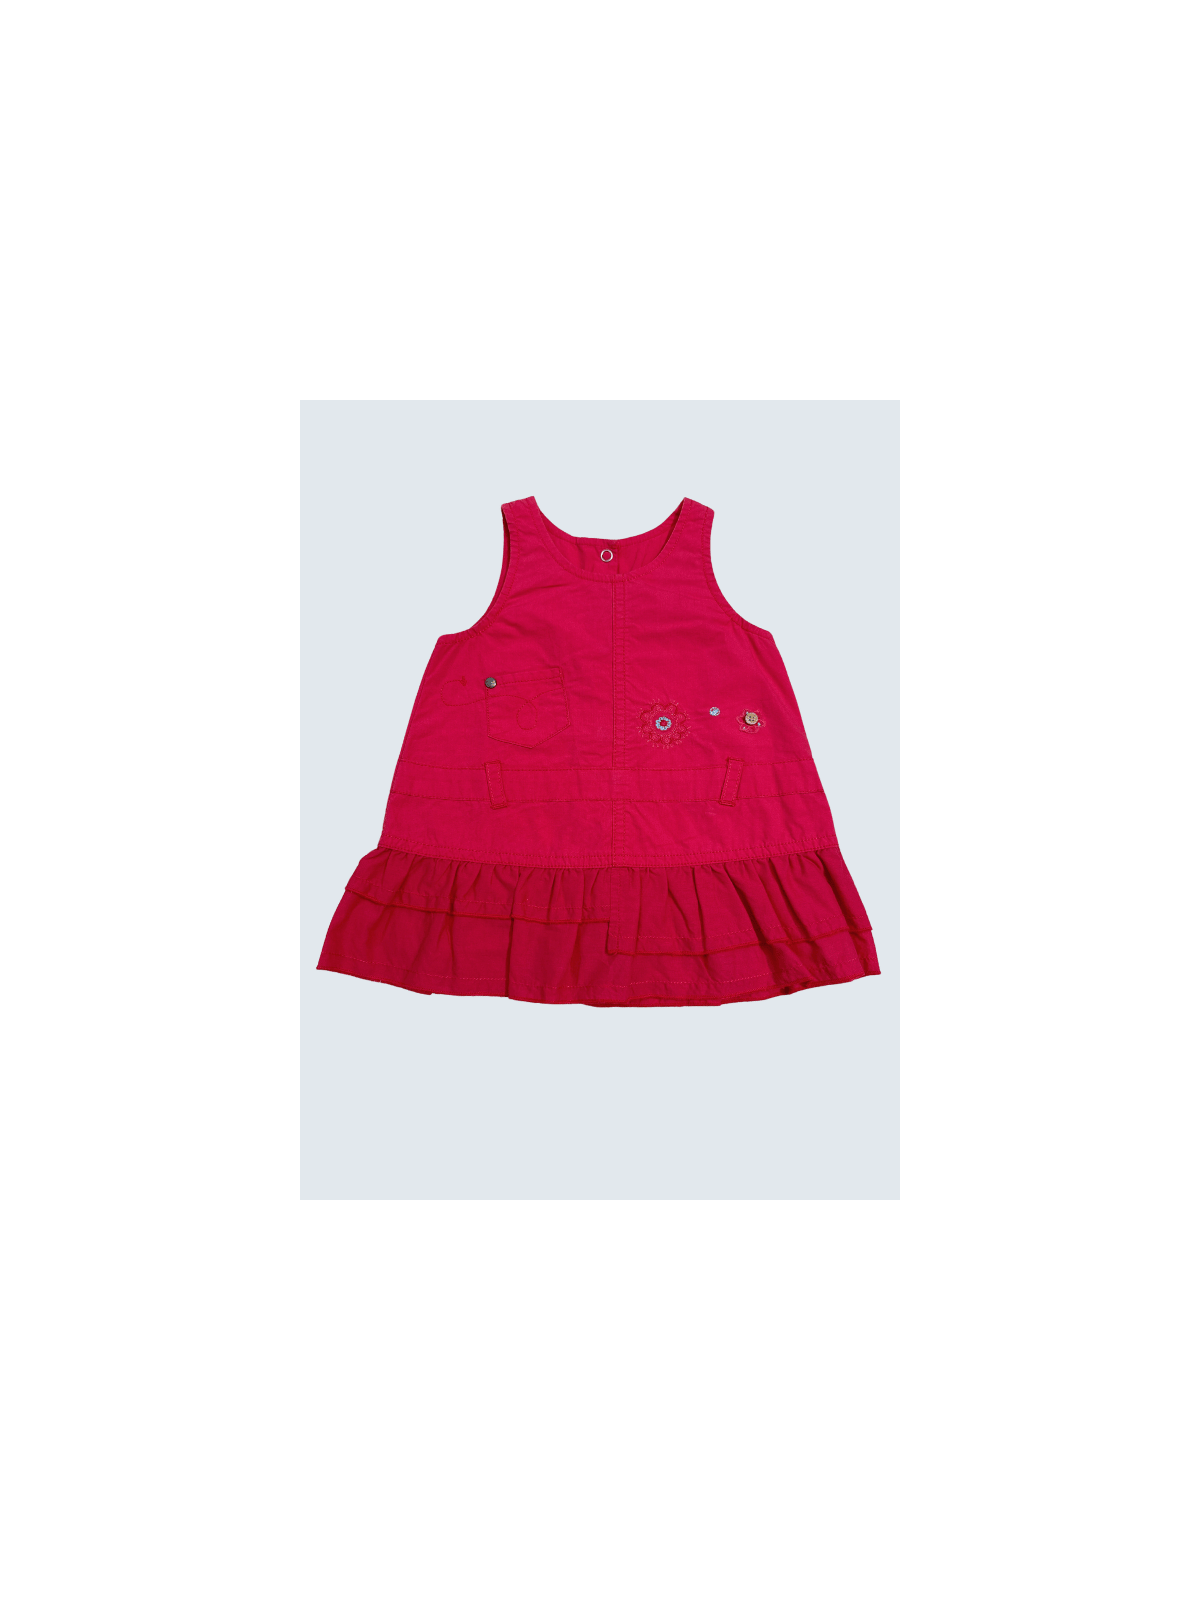 Robe d'occasion Absorba 3 Mois pour fille.